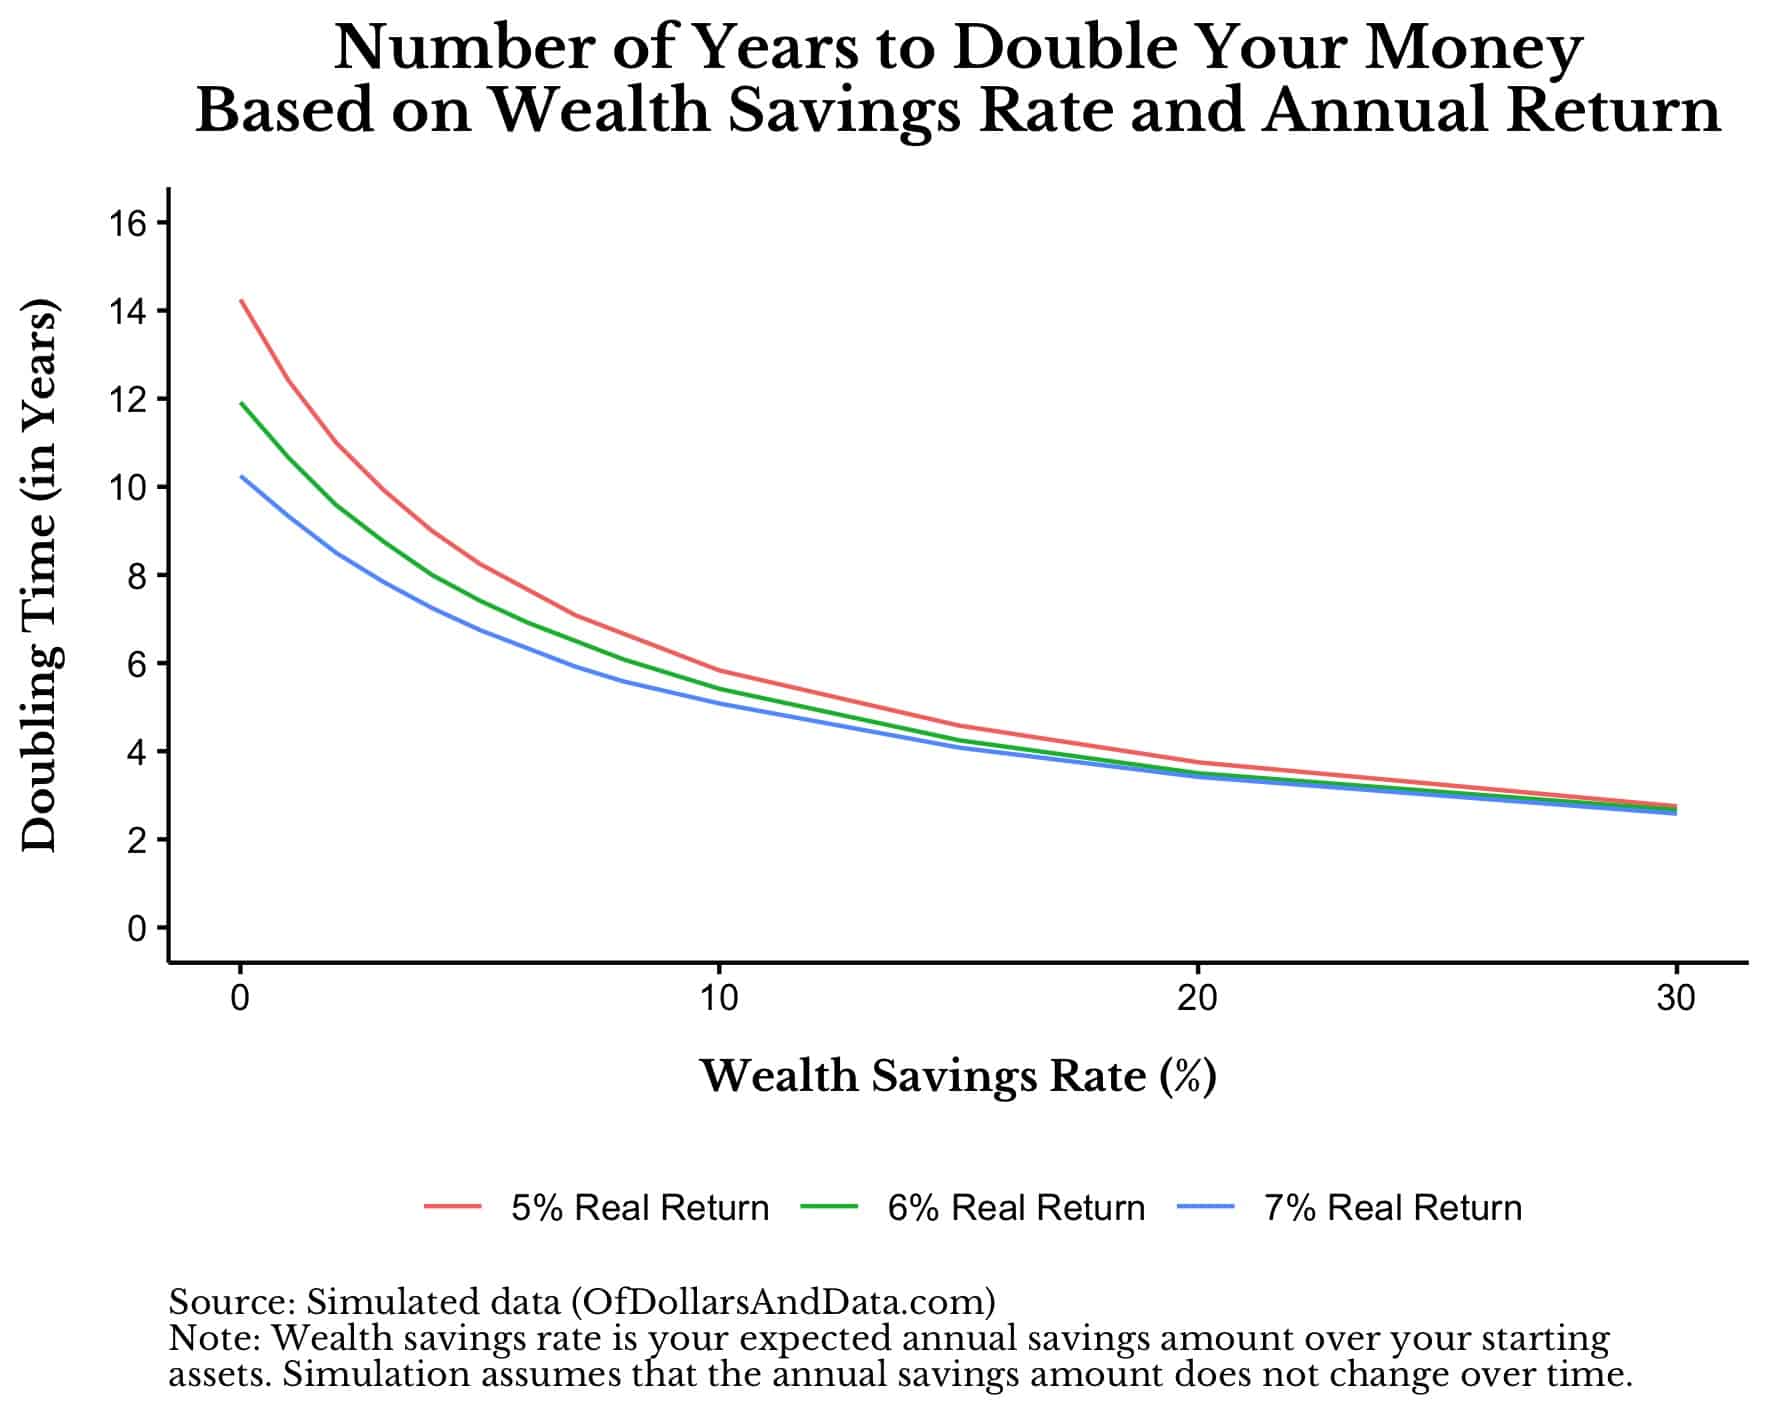 Chart showing number of years to double your money by wealth savings rate and rate of return.